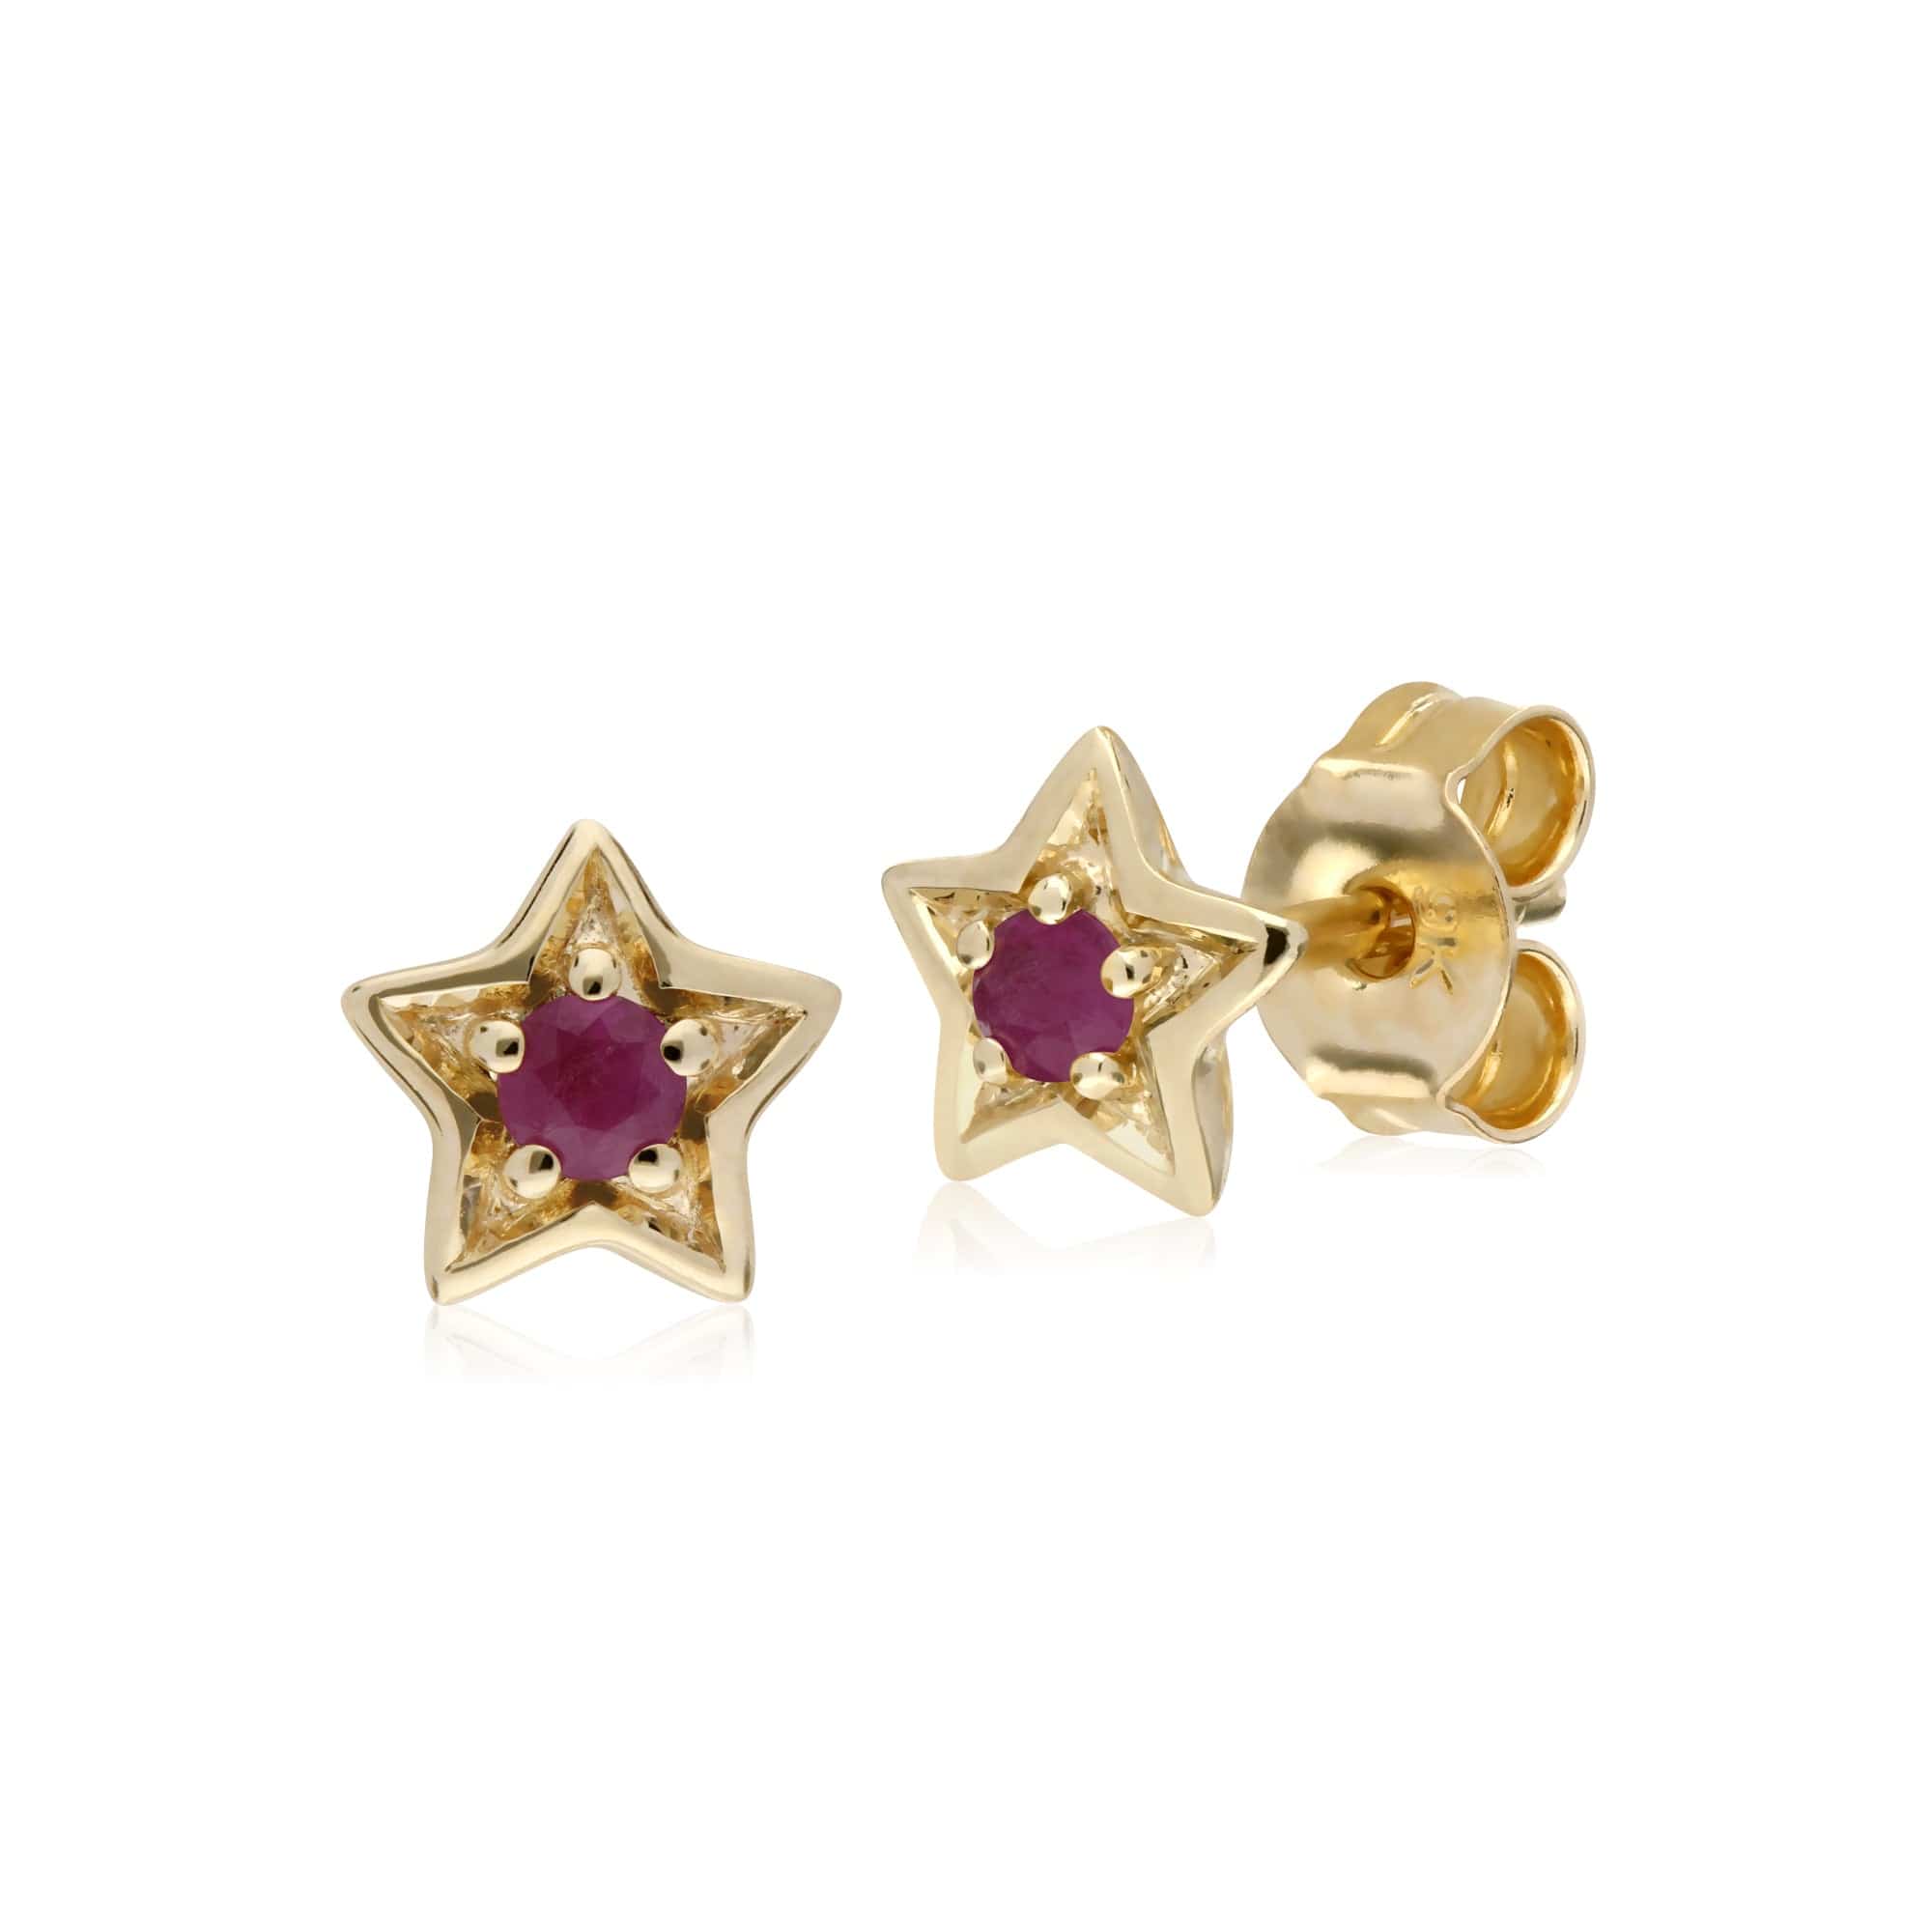 Classic Single Stone Round Ruby Star Stud Earrings in 9ct Yellow Gold - Gemondo